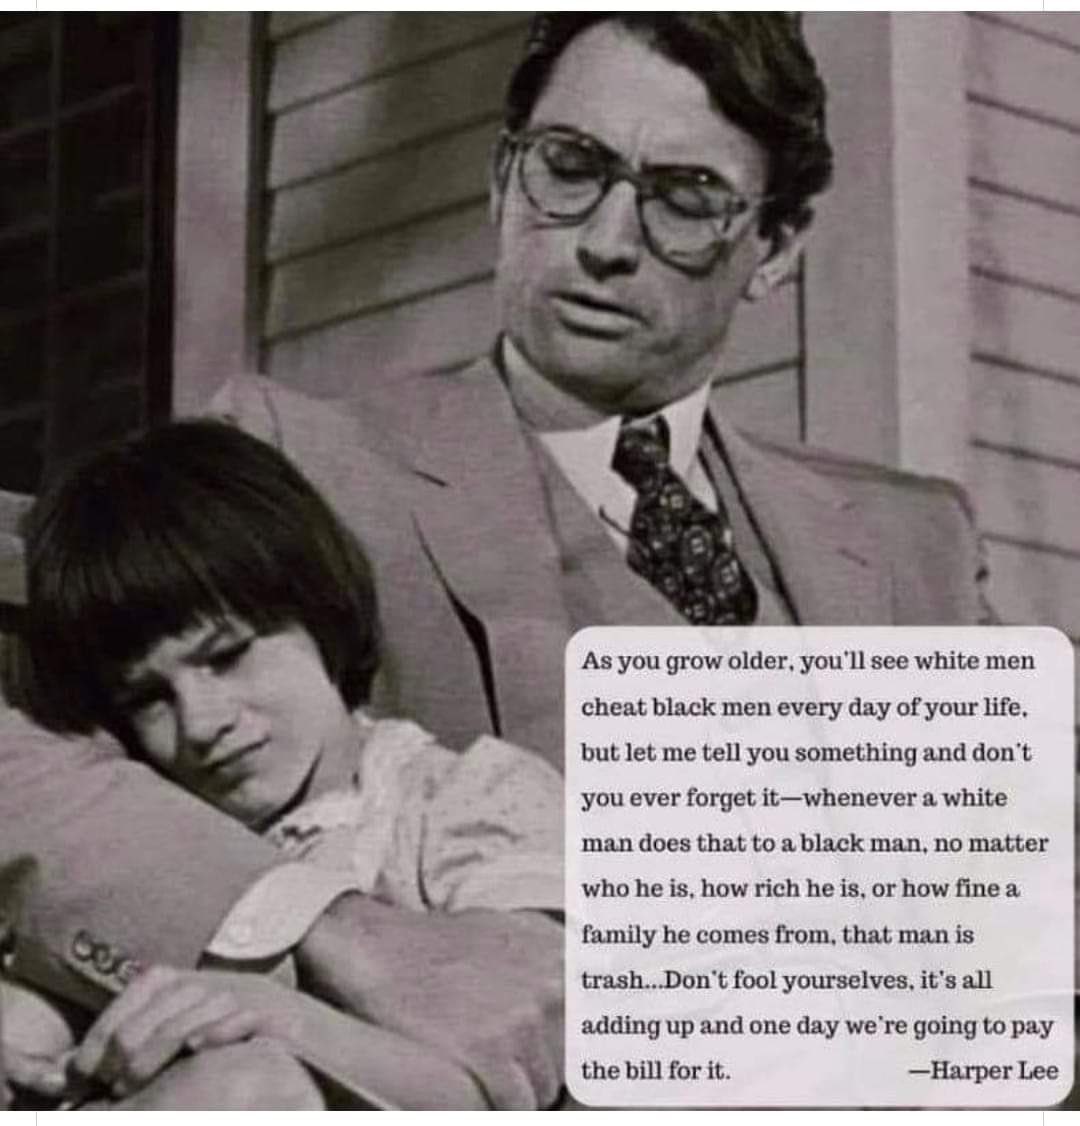 To Kill A Mockingbird seems very relevant at this present time. 